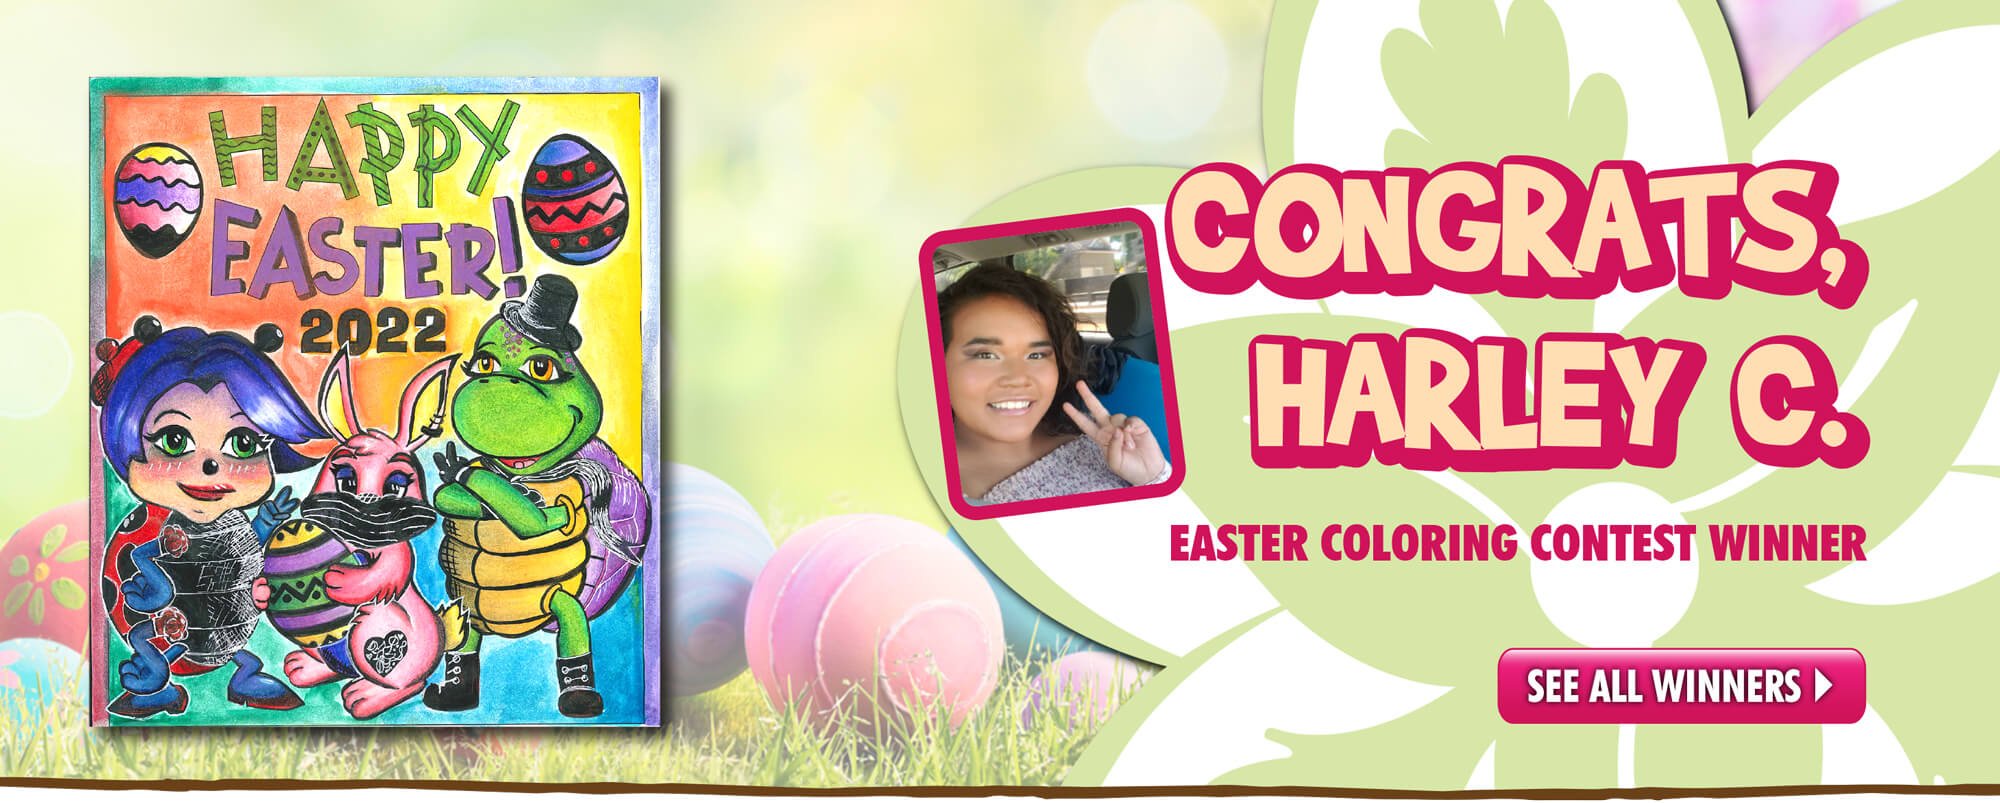 Congrats to all of our 2022 Easter Coloring Contest Winners!